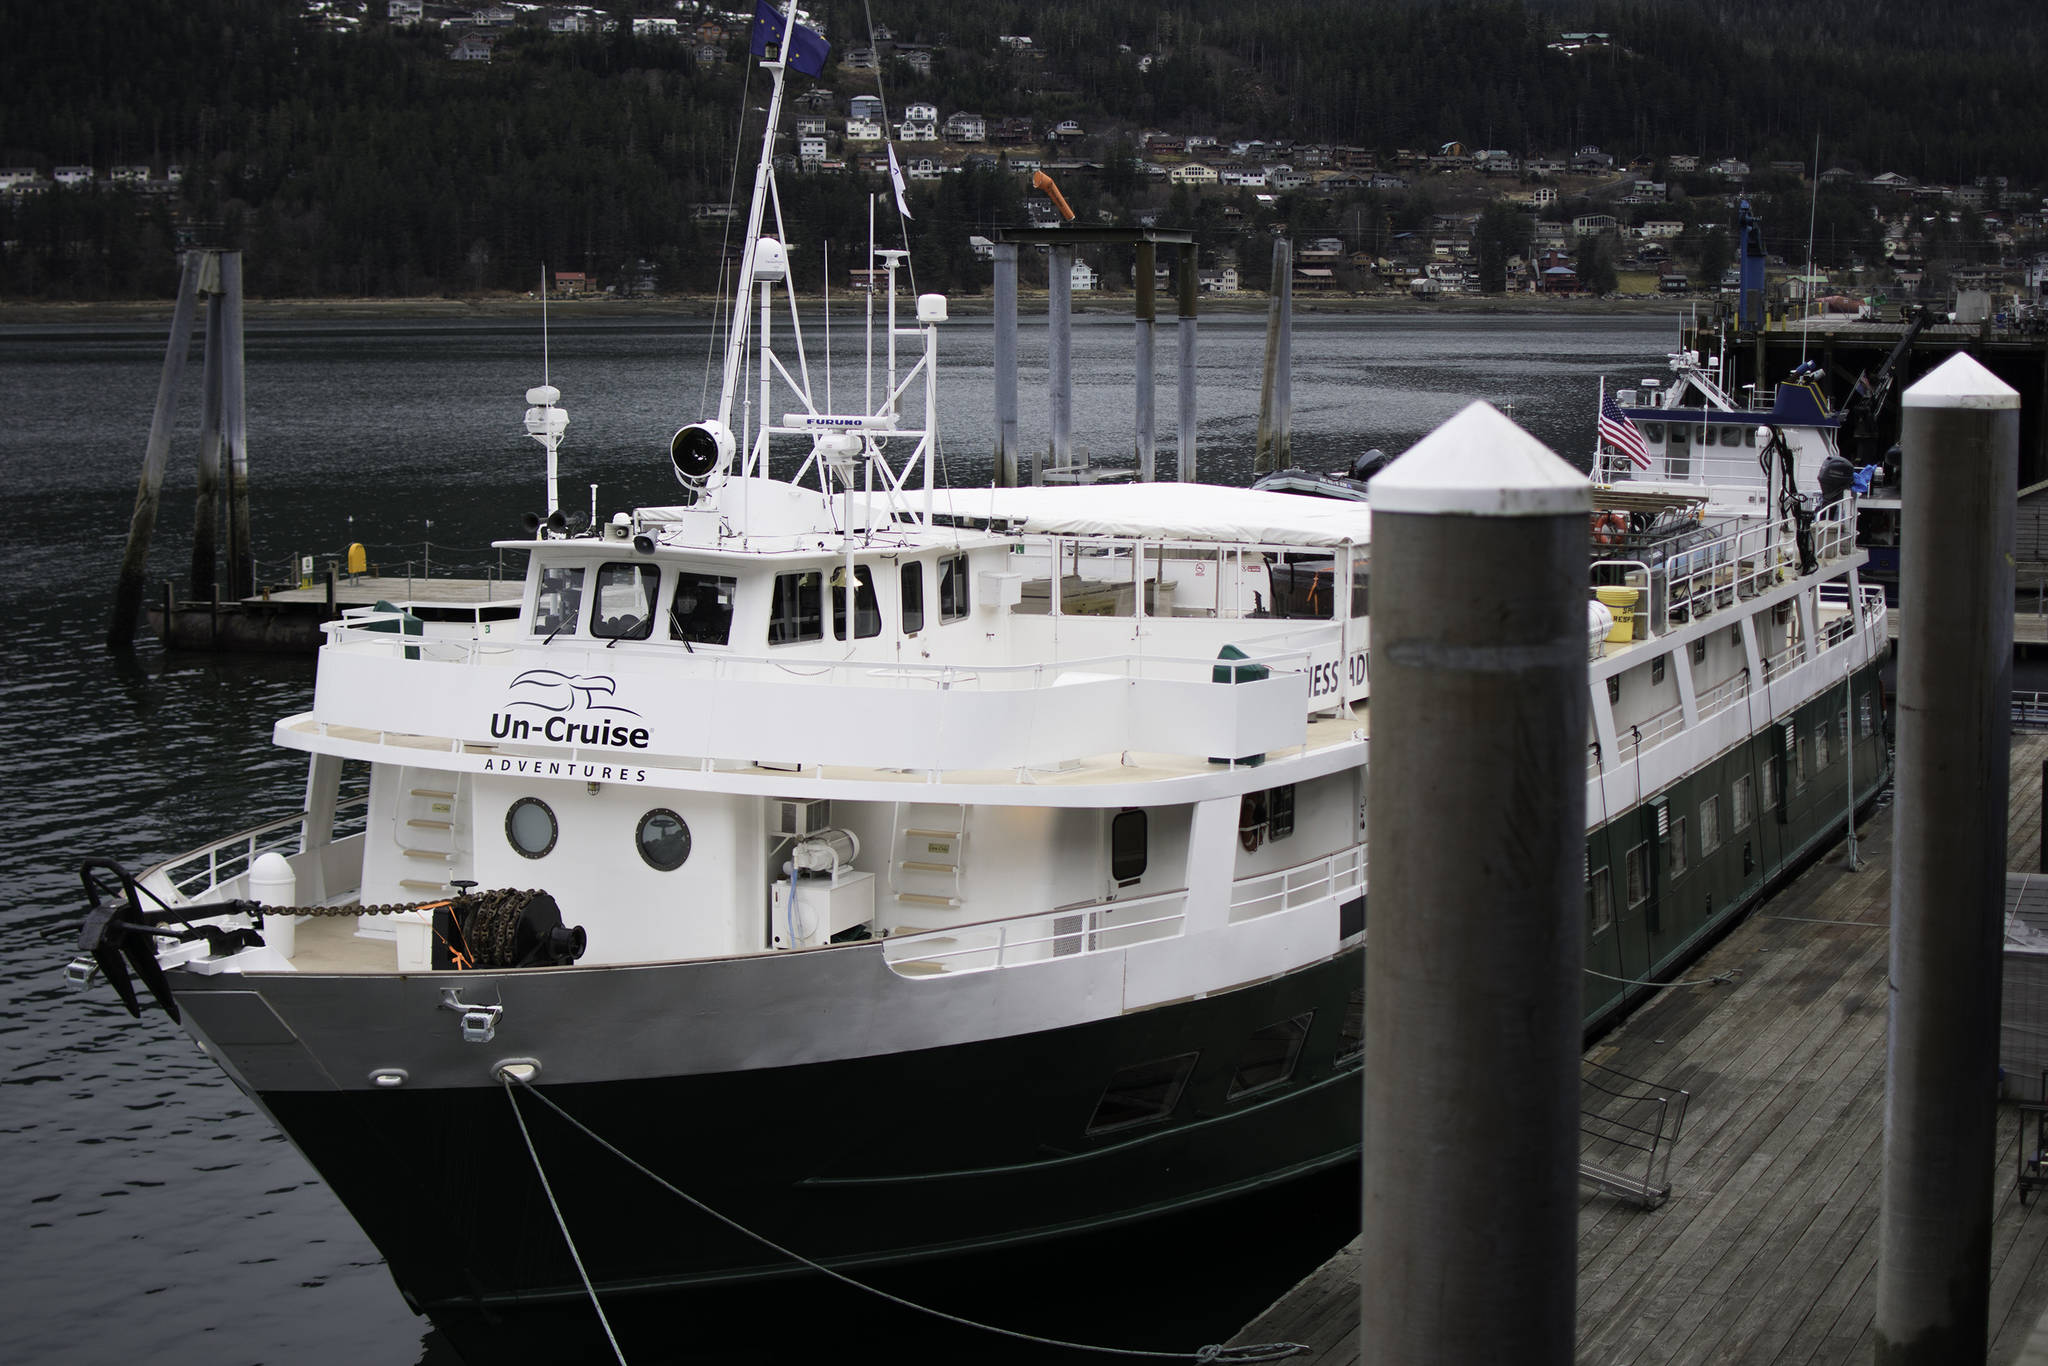 The Wilderness Adventurer is docked at the Seadrome on Friday, April 13, 2018. Aboard, politicians and representatives from the tourism industry spoke about bringing tourists to S.E. Alaska in the spring — a few months earlier than usual. The vessel set sail on its first spring cruise in Alaska the day after this photo was taken. (Richard McGrail | Juneau Empire)